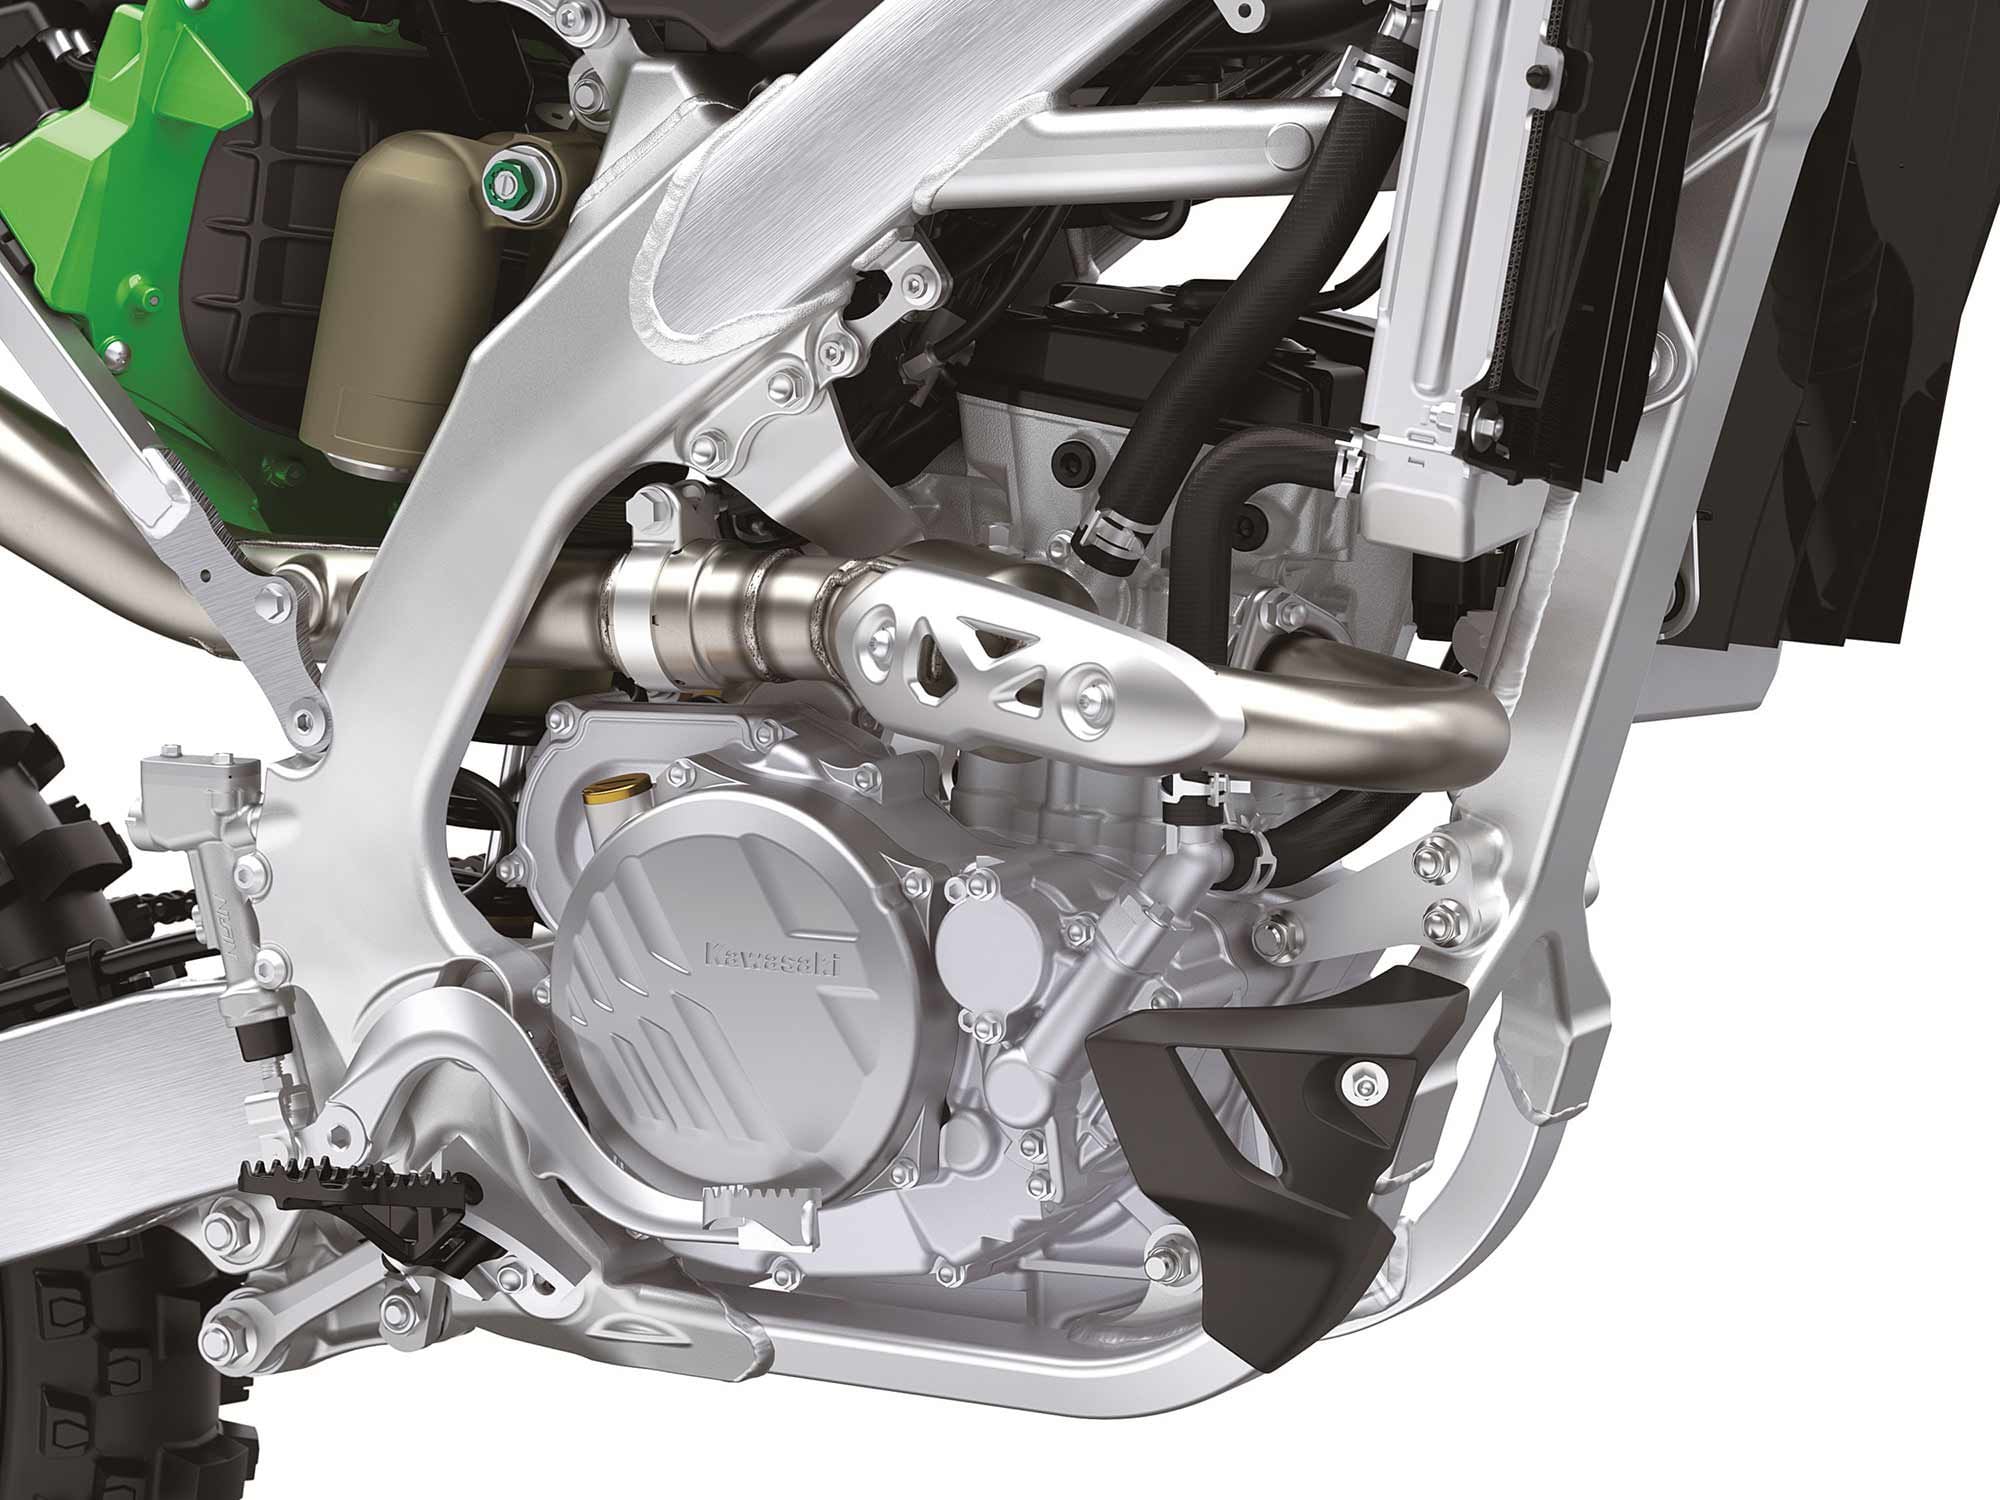 The revised 249 cc engine will provide better power across the entire rev range.